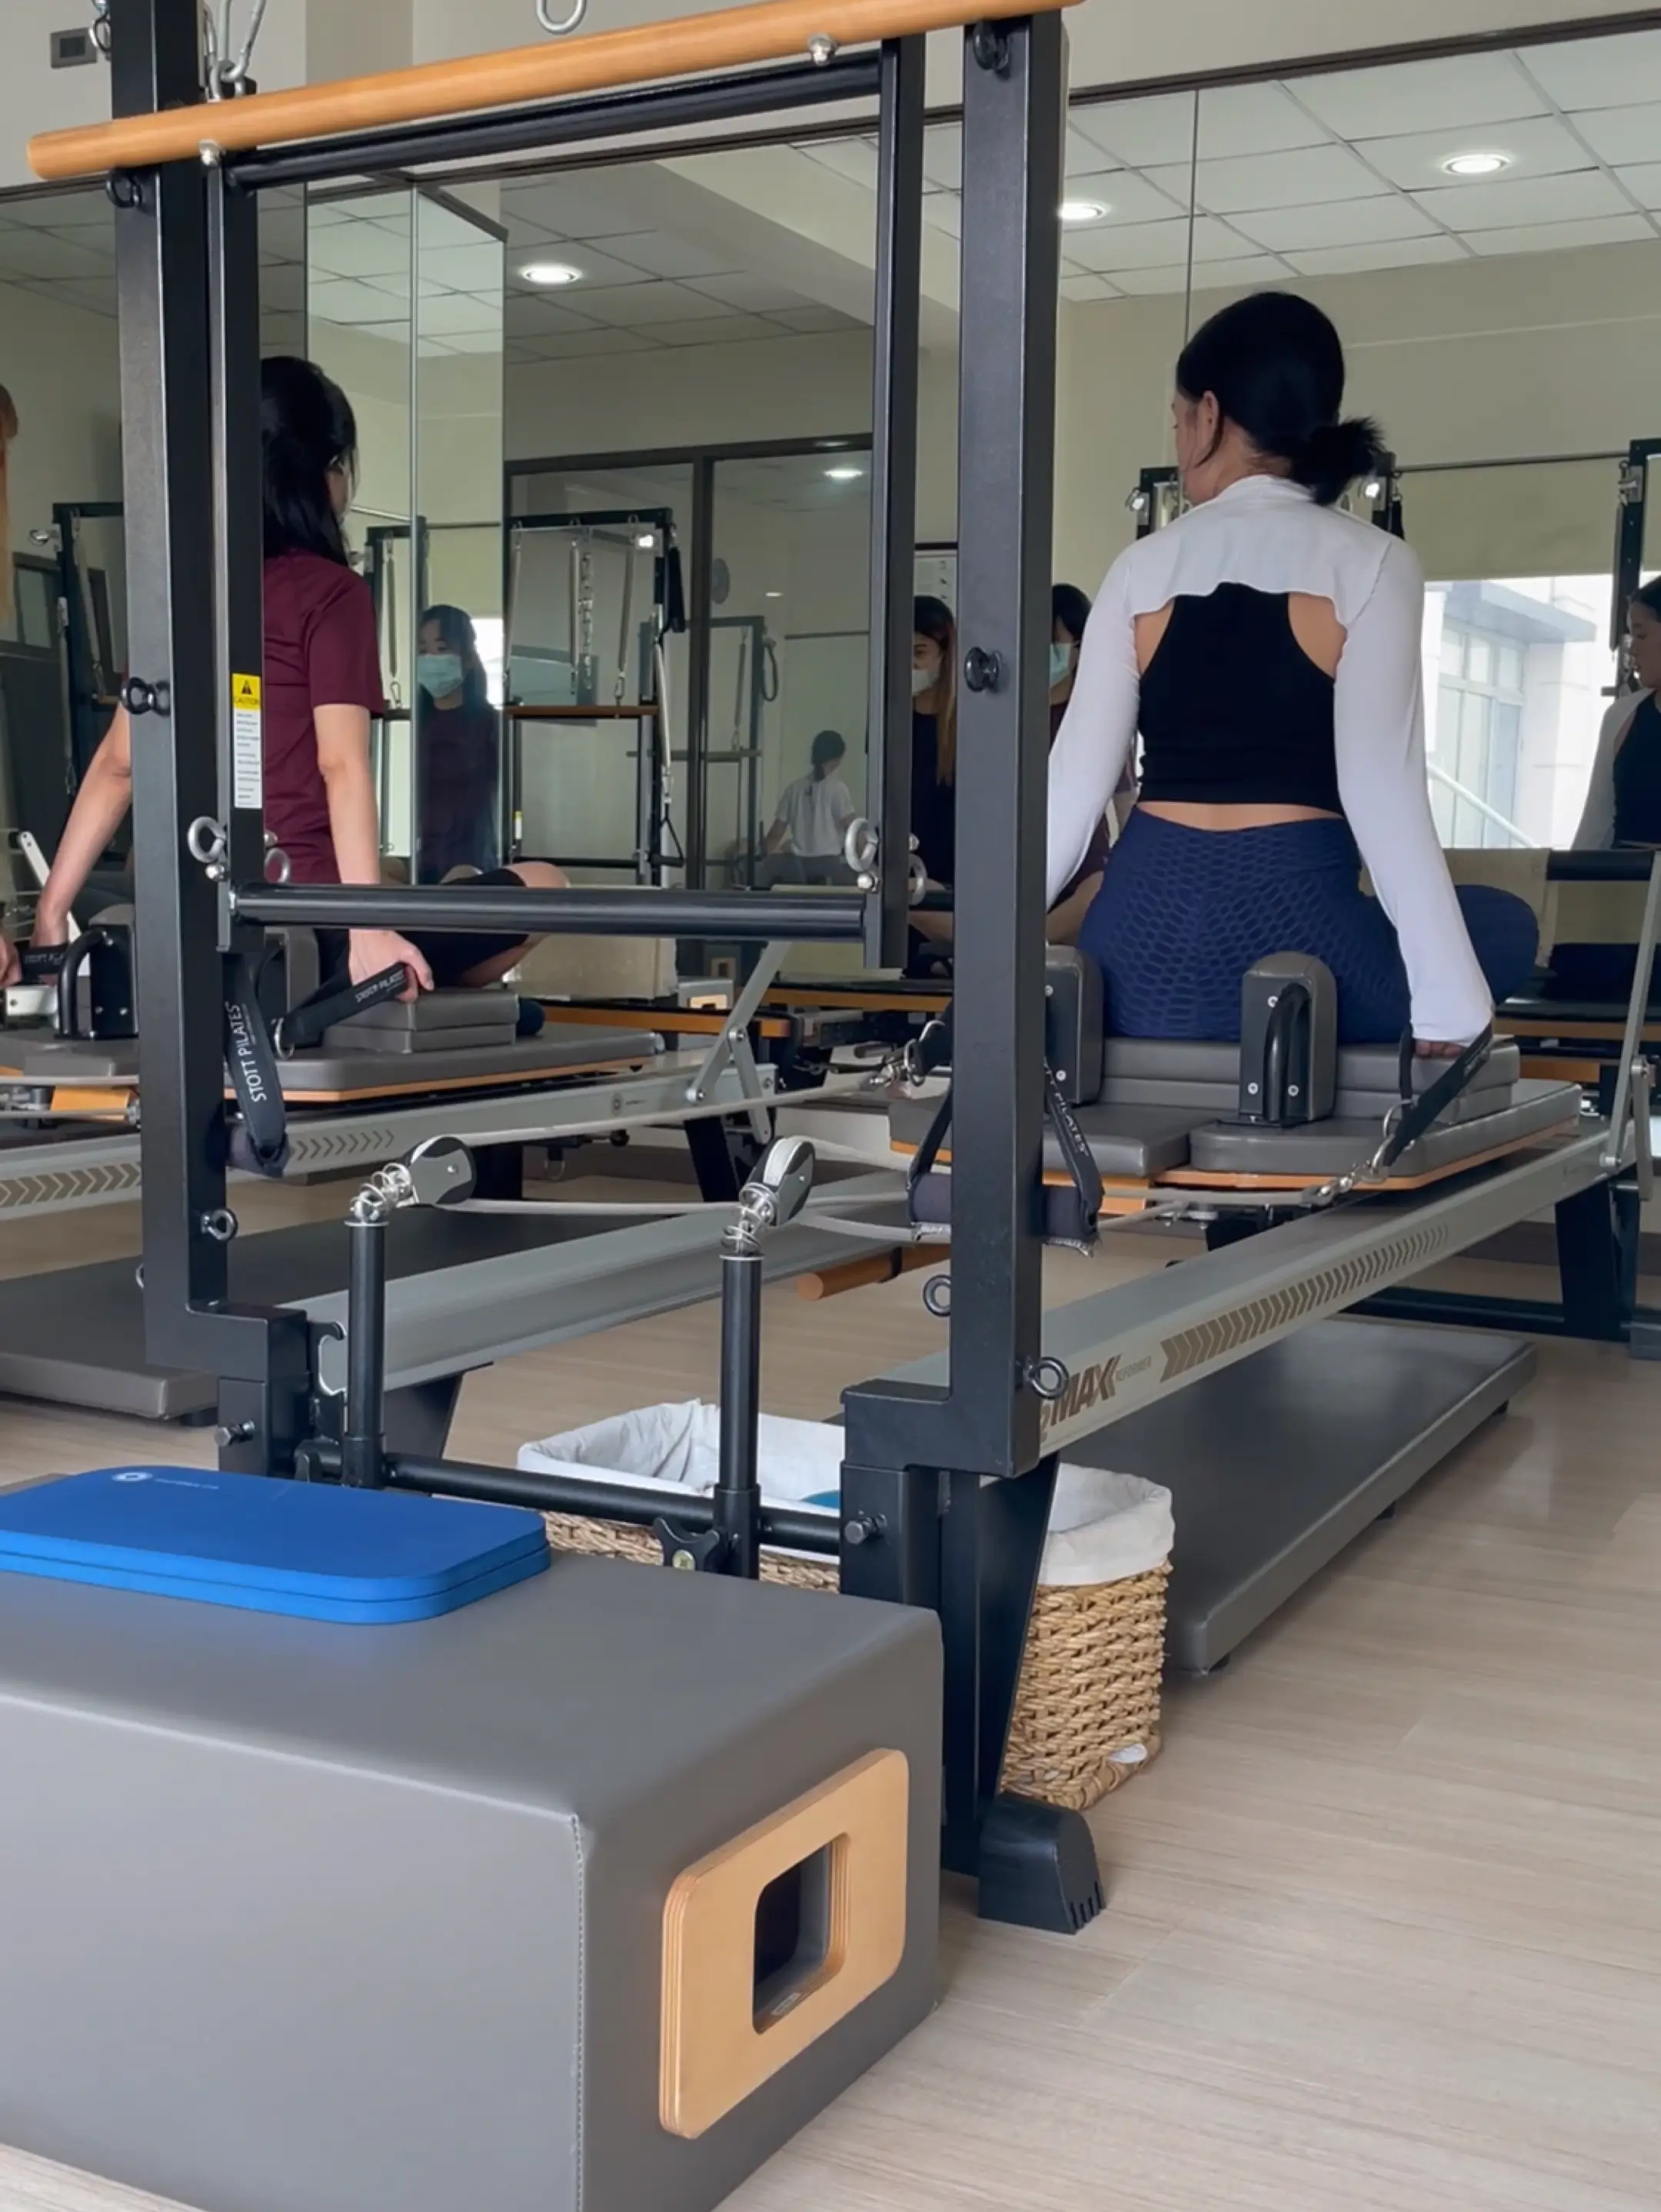 Foldable Pilates Reformer Set P3 for sale【how much】At home folding pilates -Cunruope®